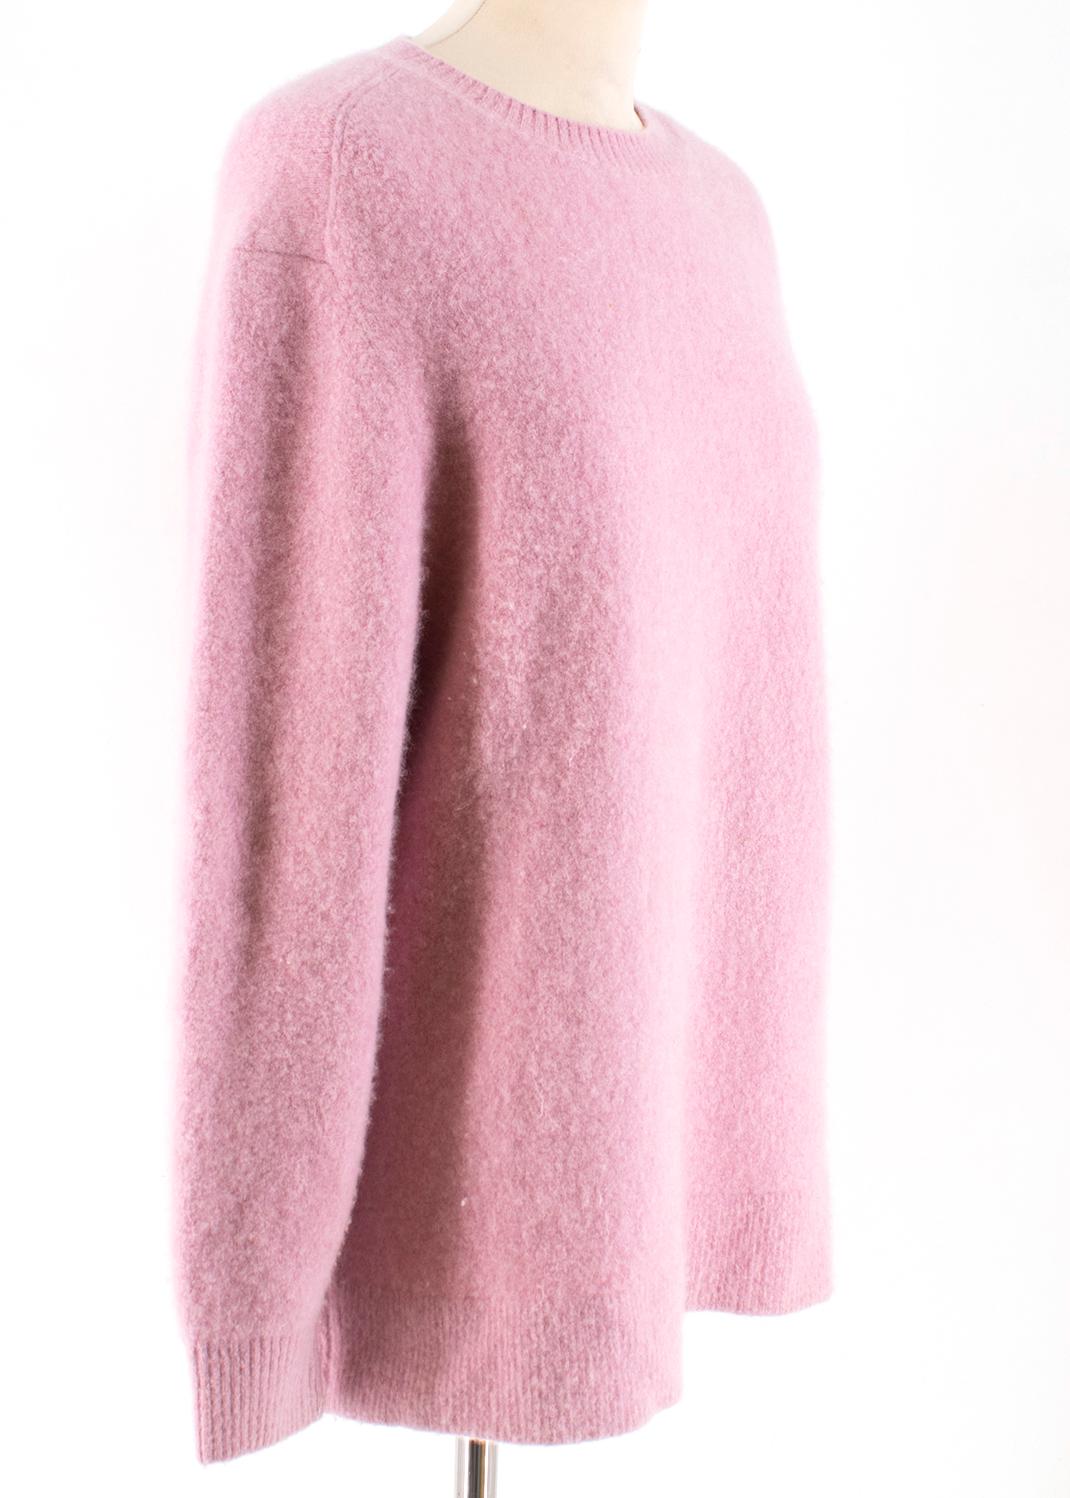 Joostricot Pink 3/4 oversized sweater and shorts Cashmere set. Gorgeous Cashmere set, Fits true to size. Designed for a close fit. Mid-weight knit.

Sold Out online - Current season.

Cashmere x Lycra x Nylon

UK6
36